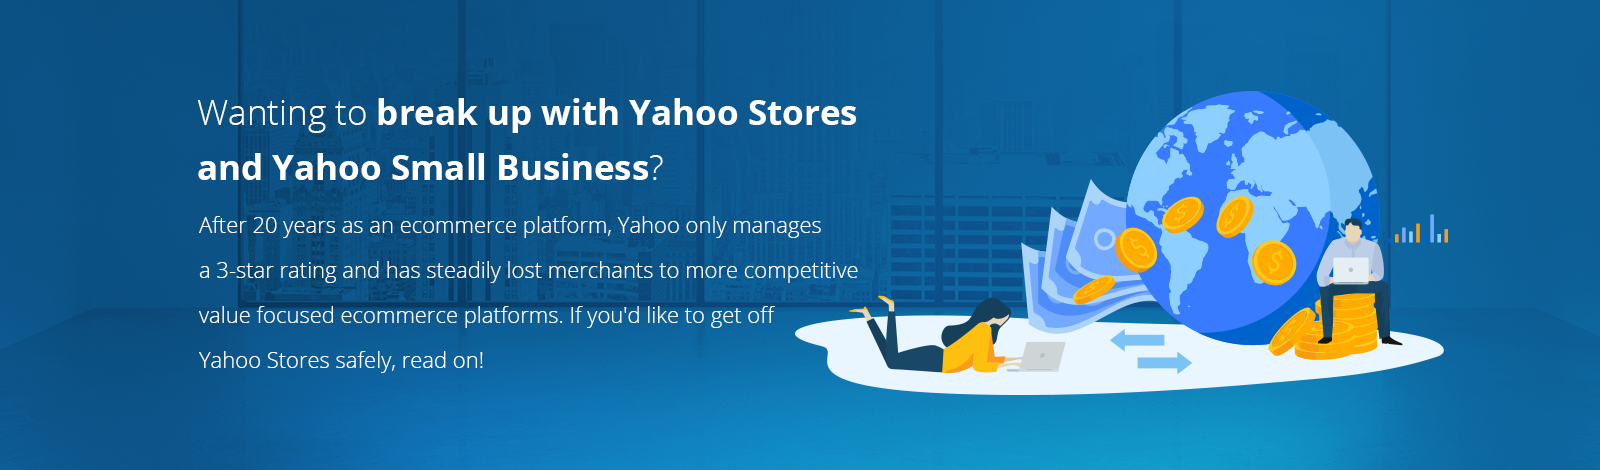 Yahoo Stores migration